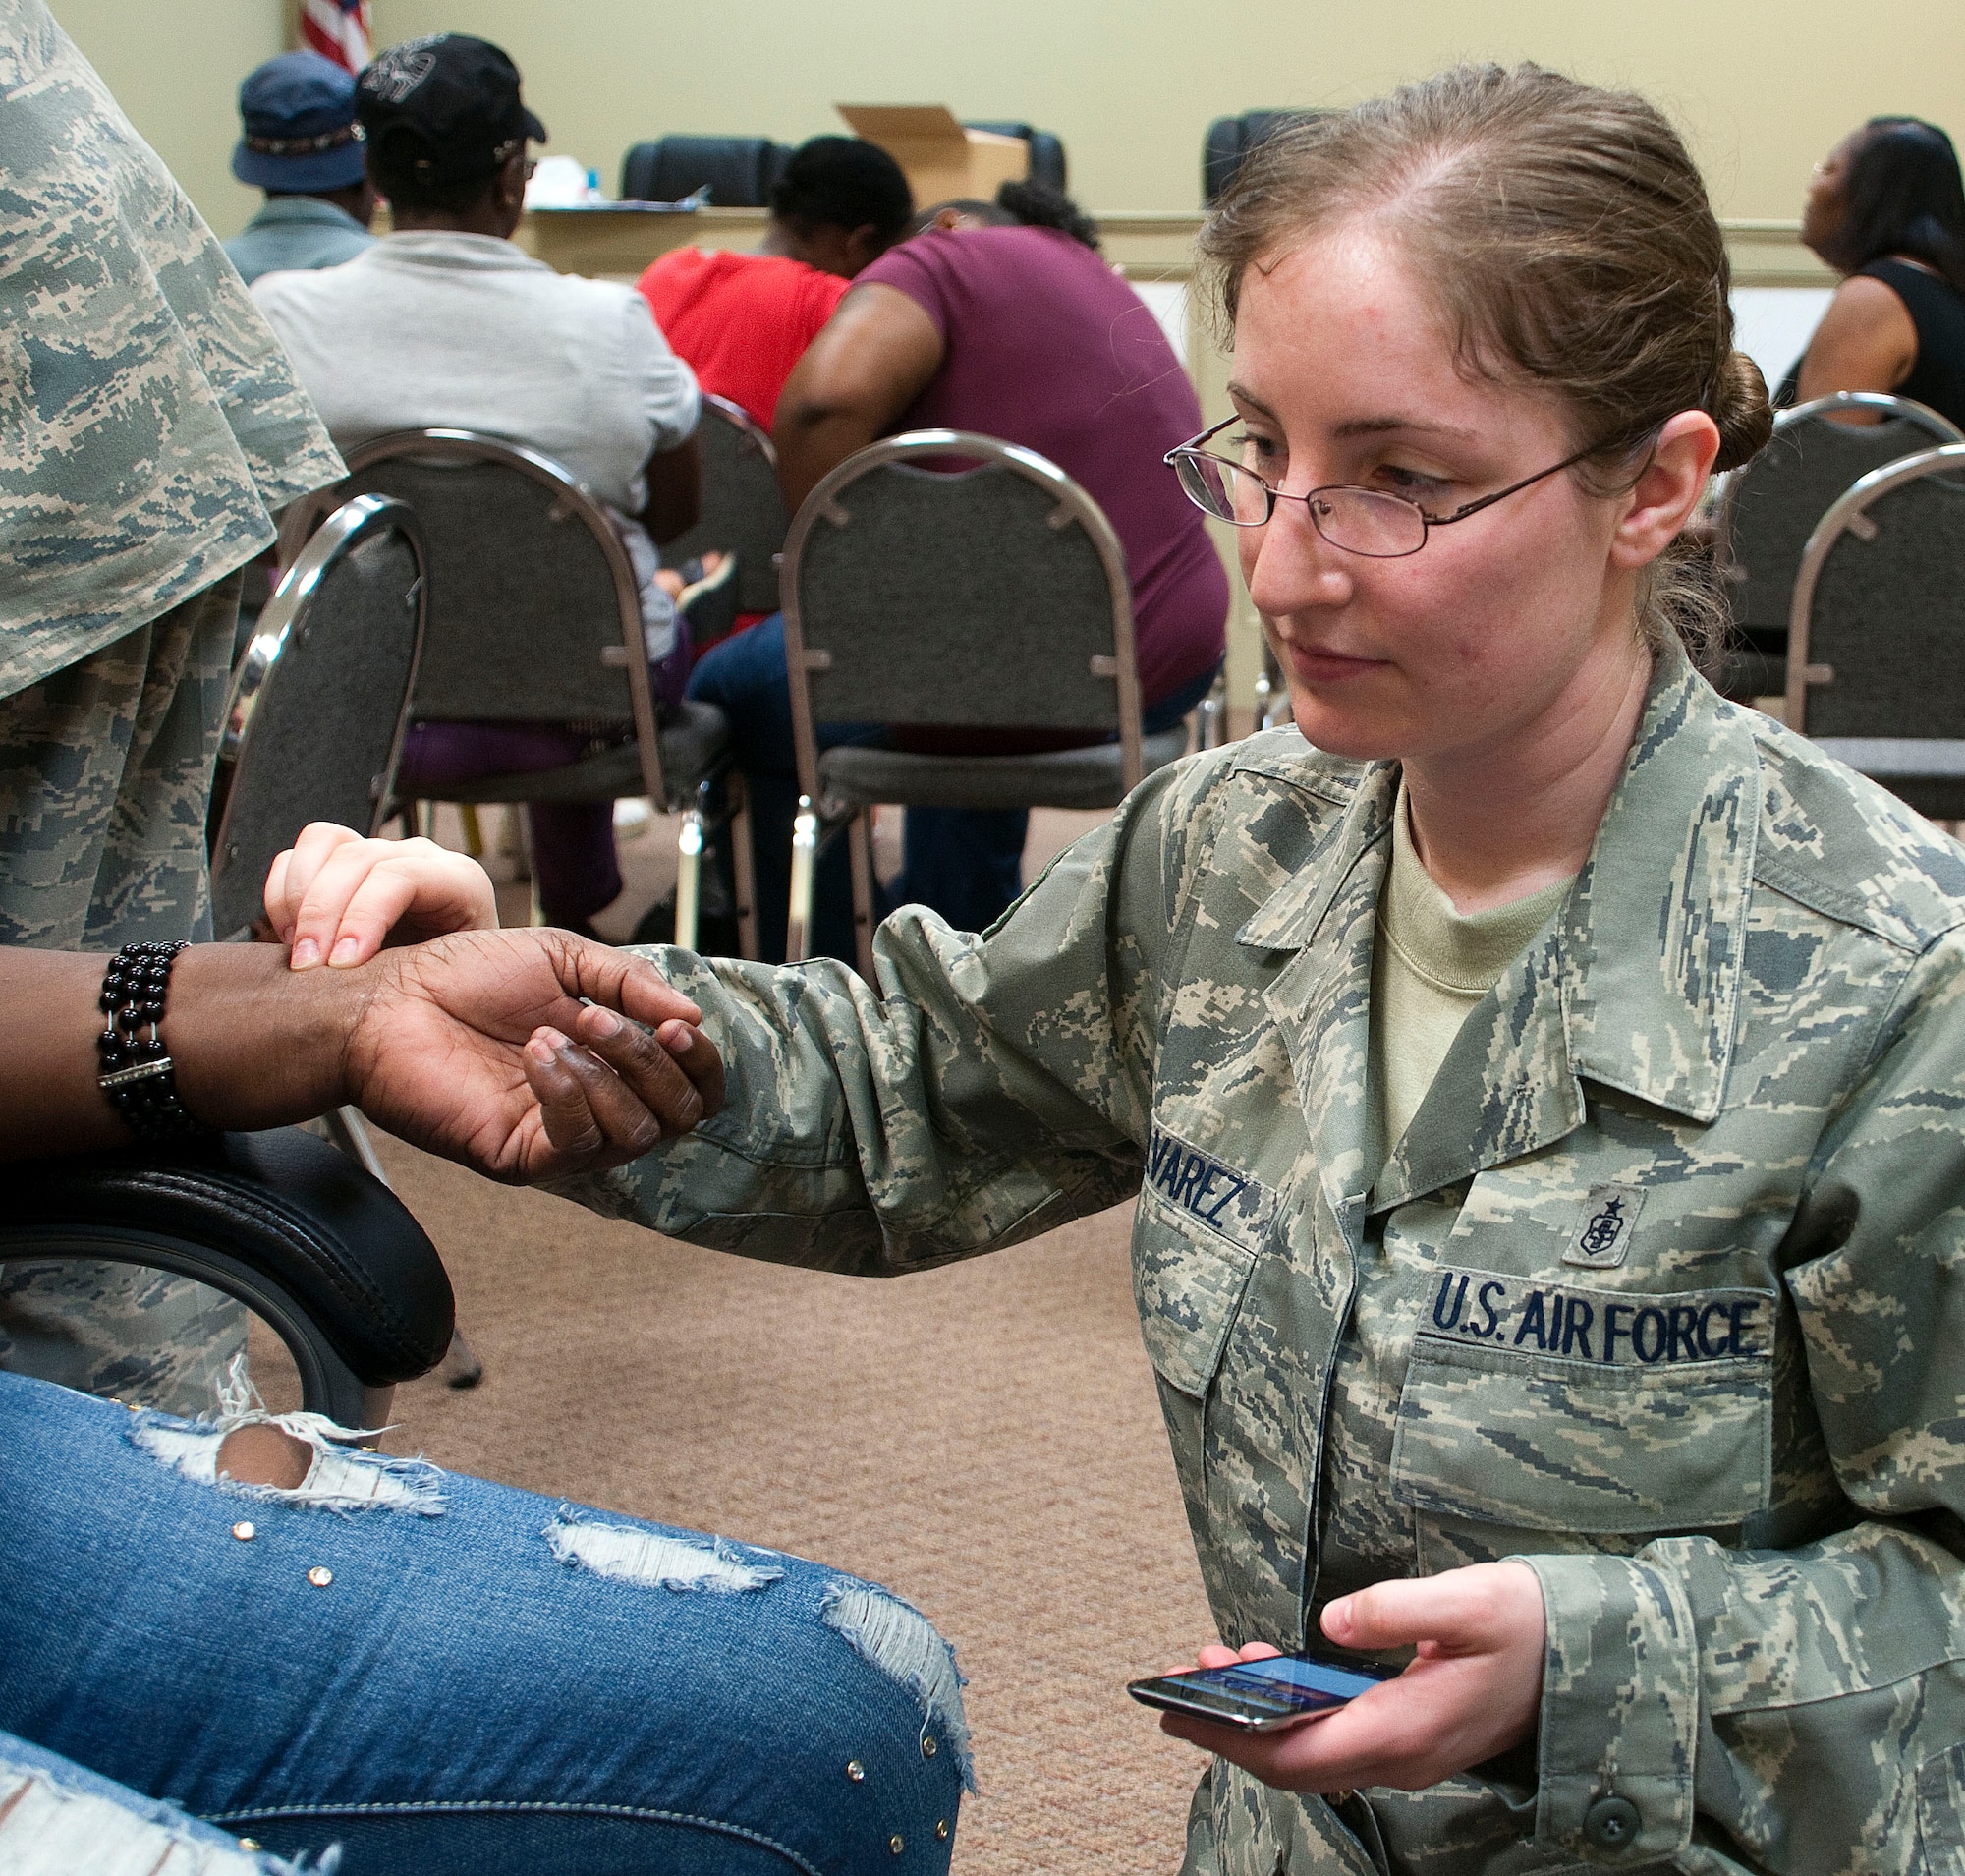 HAYNEVILLE, Ala. -- Master Sgt. Jessica Alvarez, a medical technician with the Alaska Air National Guard's 176th Medical Group, uses an iPhone and a steady hand to take a patient's pulse at a free medical clinic here May 3, 2011. Twenty-five members of the medical group (together with 10 support personnel from other Alaska Air Guard units) arrived here May 1 for 12 days of training through the Innovative Readiness Program. This program allows Guard and Reserve members to get the training they need while at the same time delivering real-world results -- in this case, providing an array of health-care services to a historically underserved area. Alaska Air National Guard photo by Capt. John Callahan.